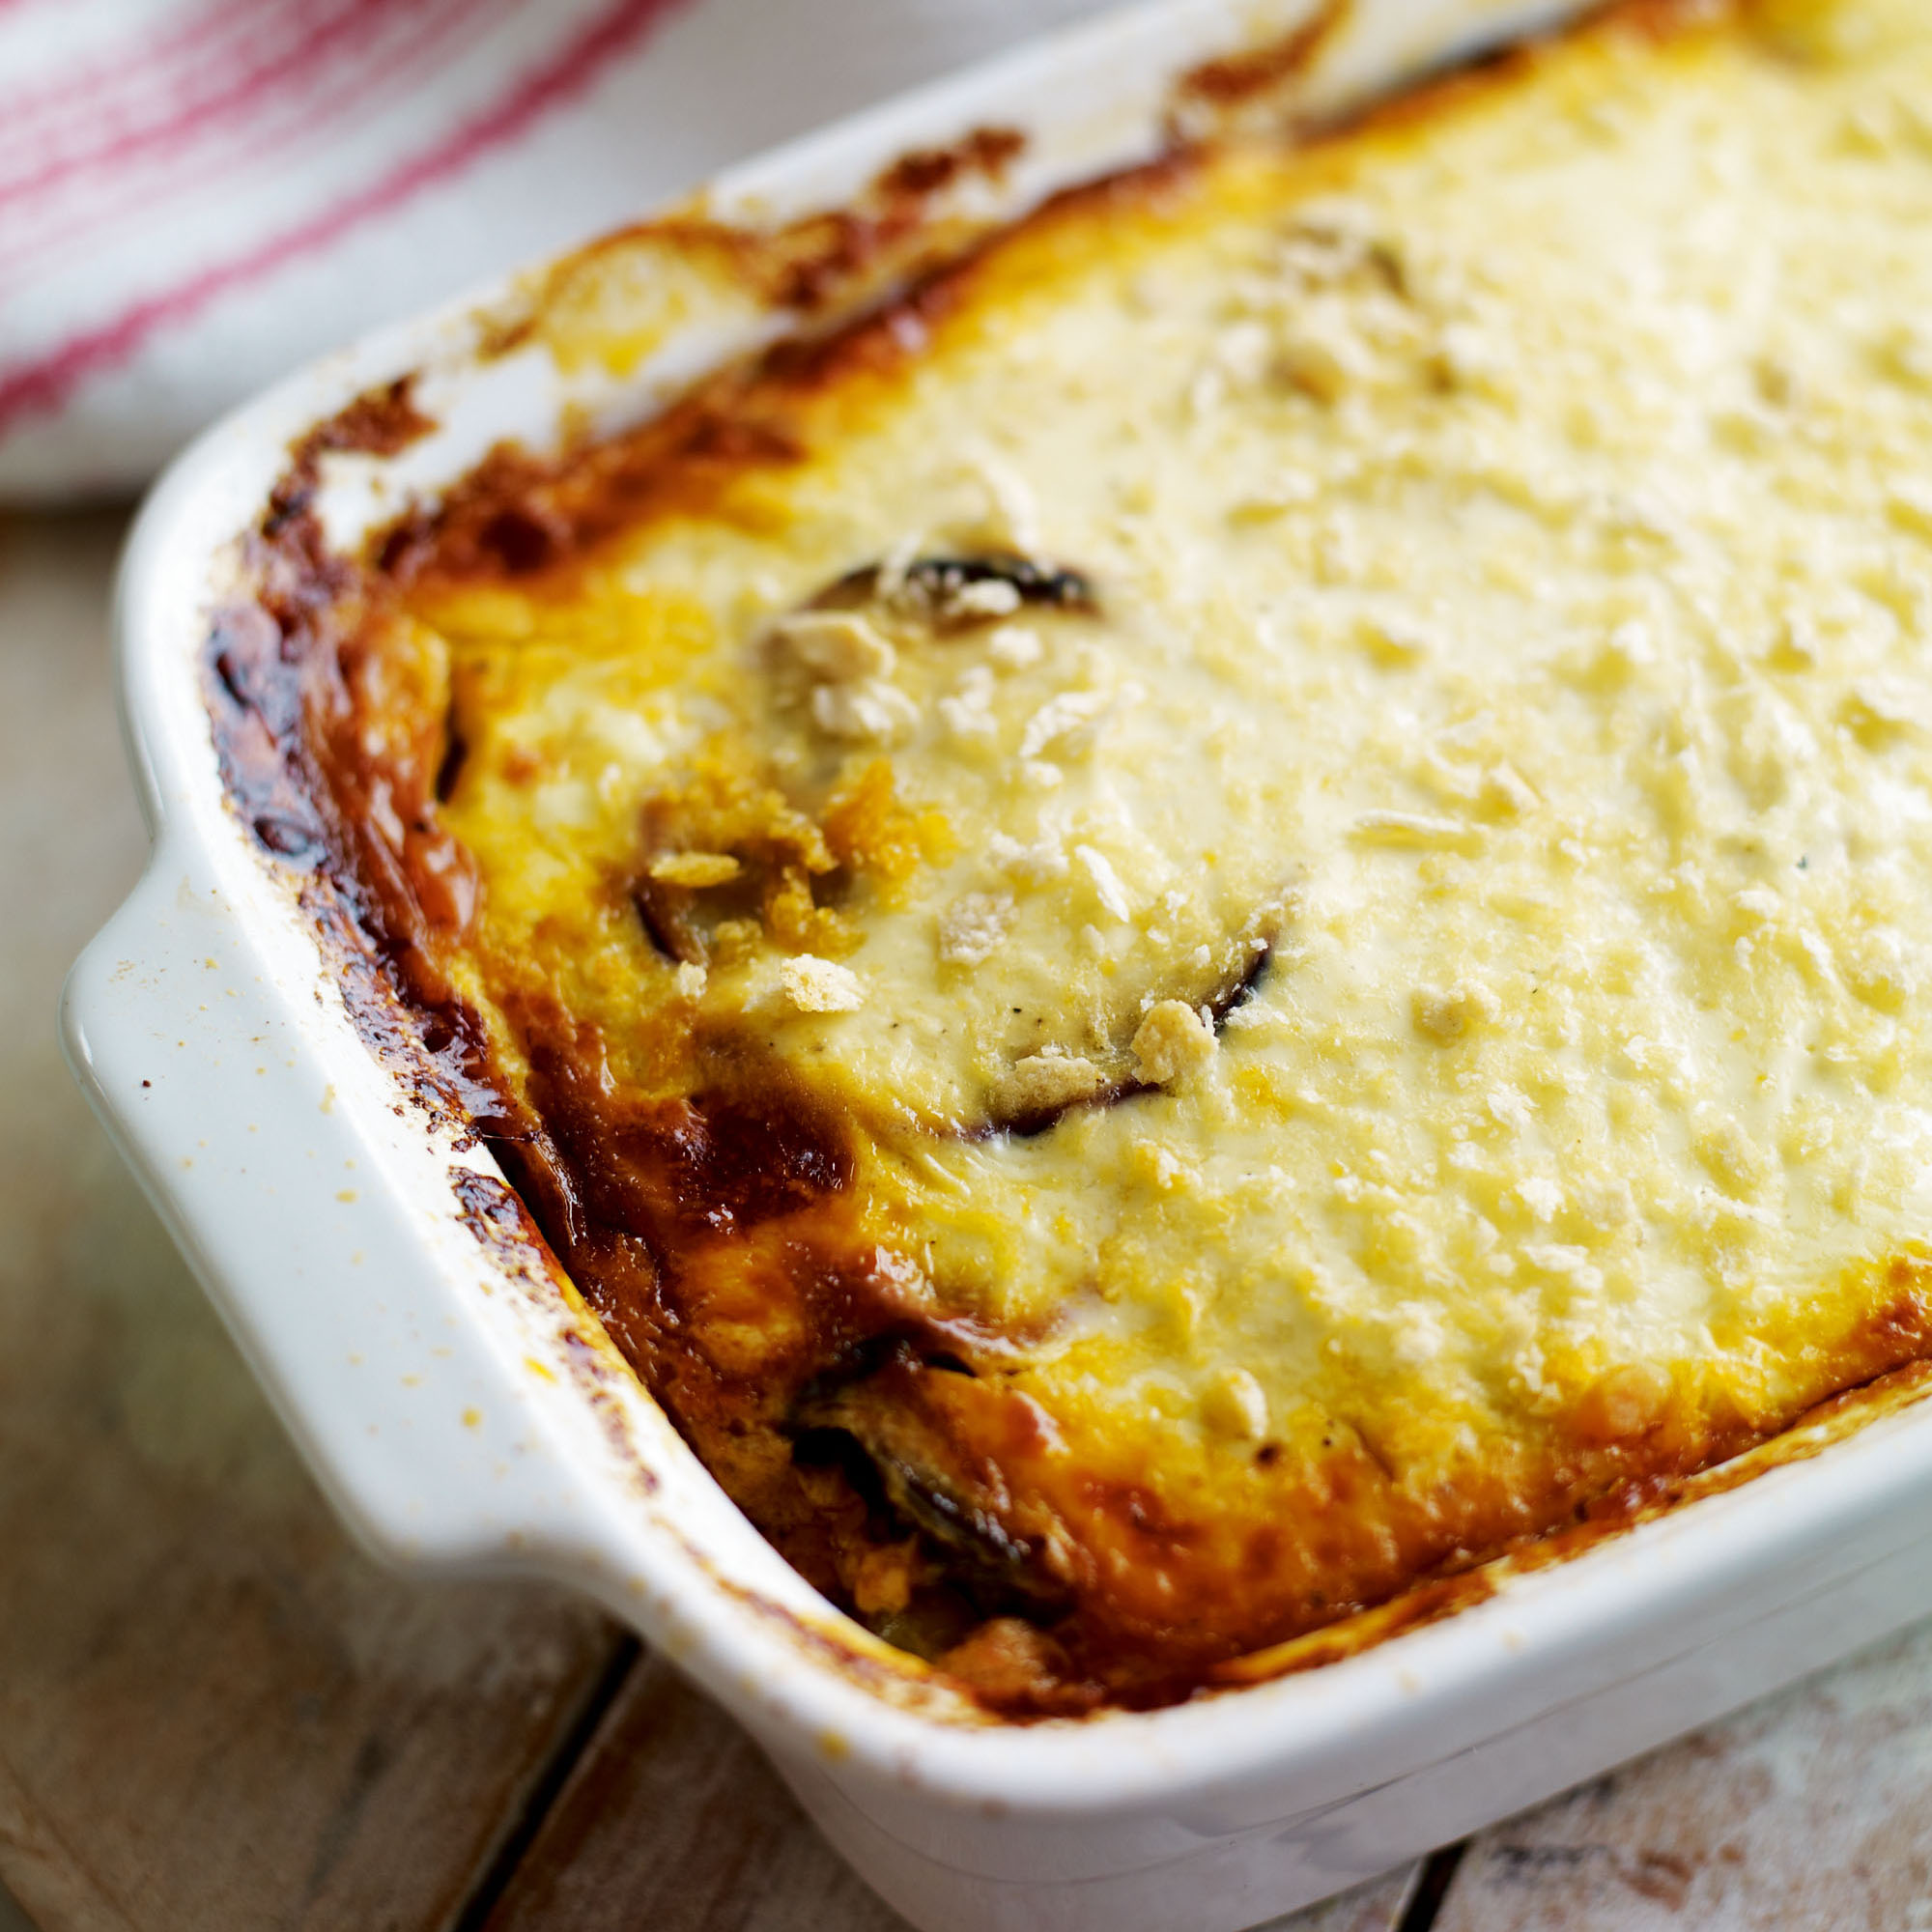 Spiced beef moussaka recipe